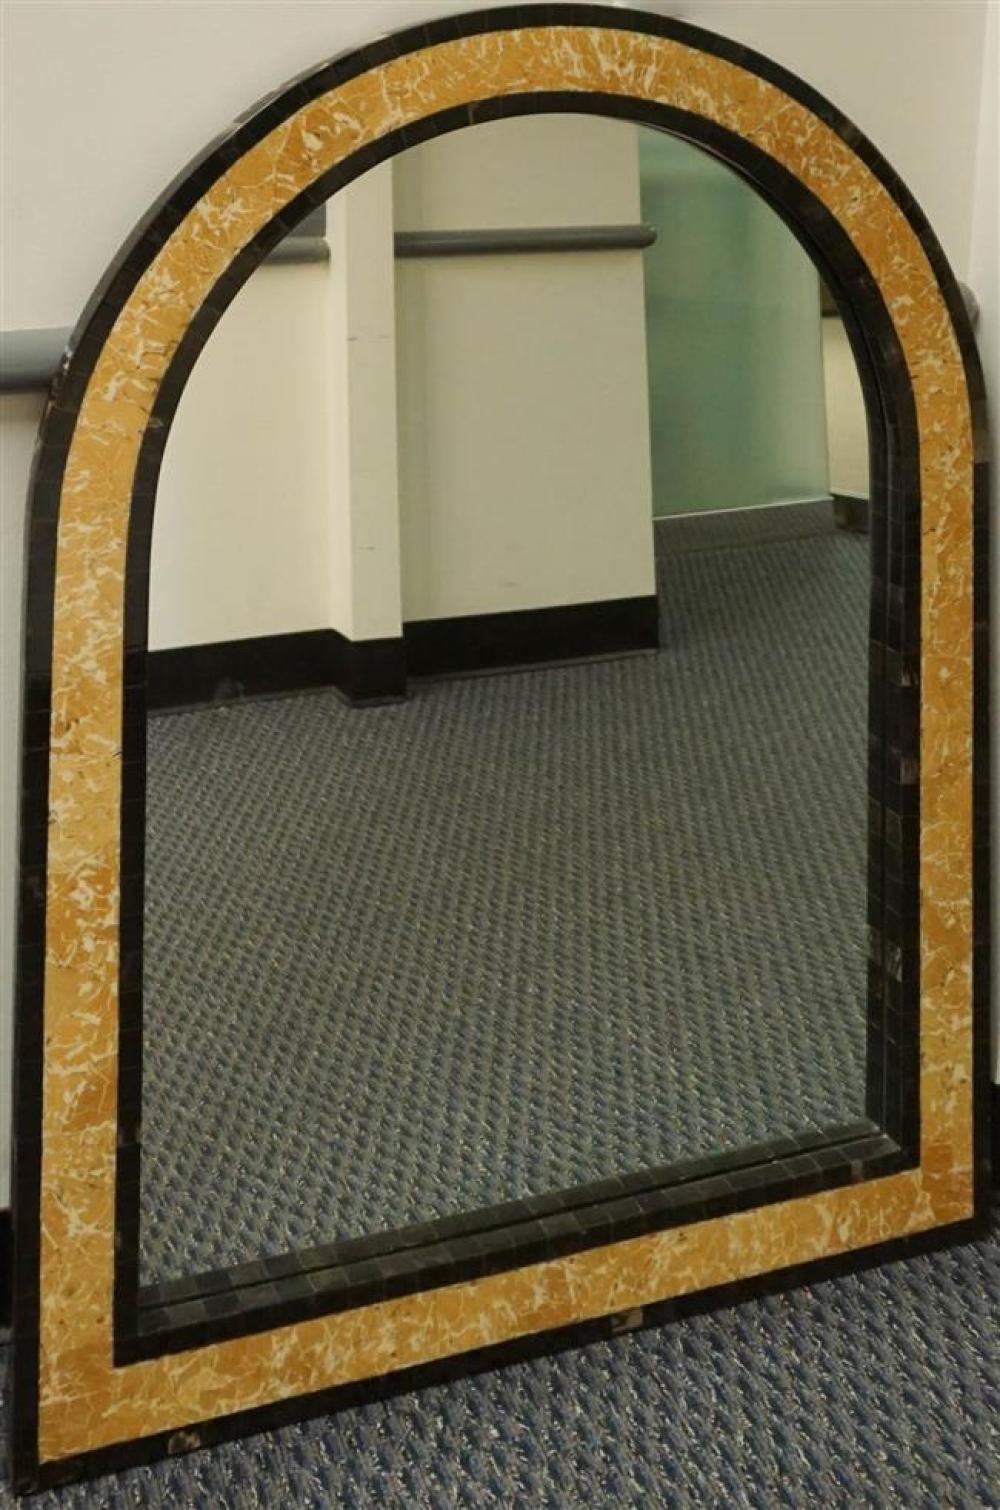 CONTEMPORARY DECORATED FRAME MIRROR 325d4f